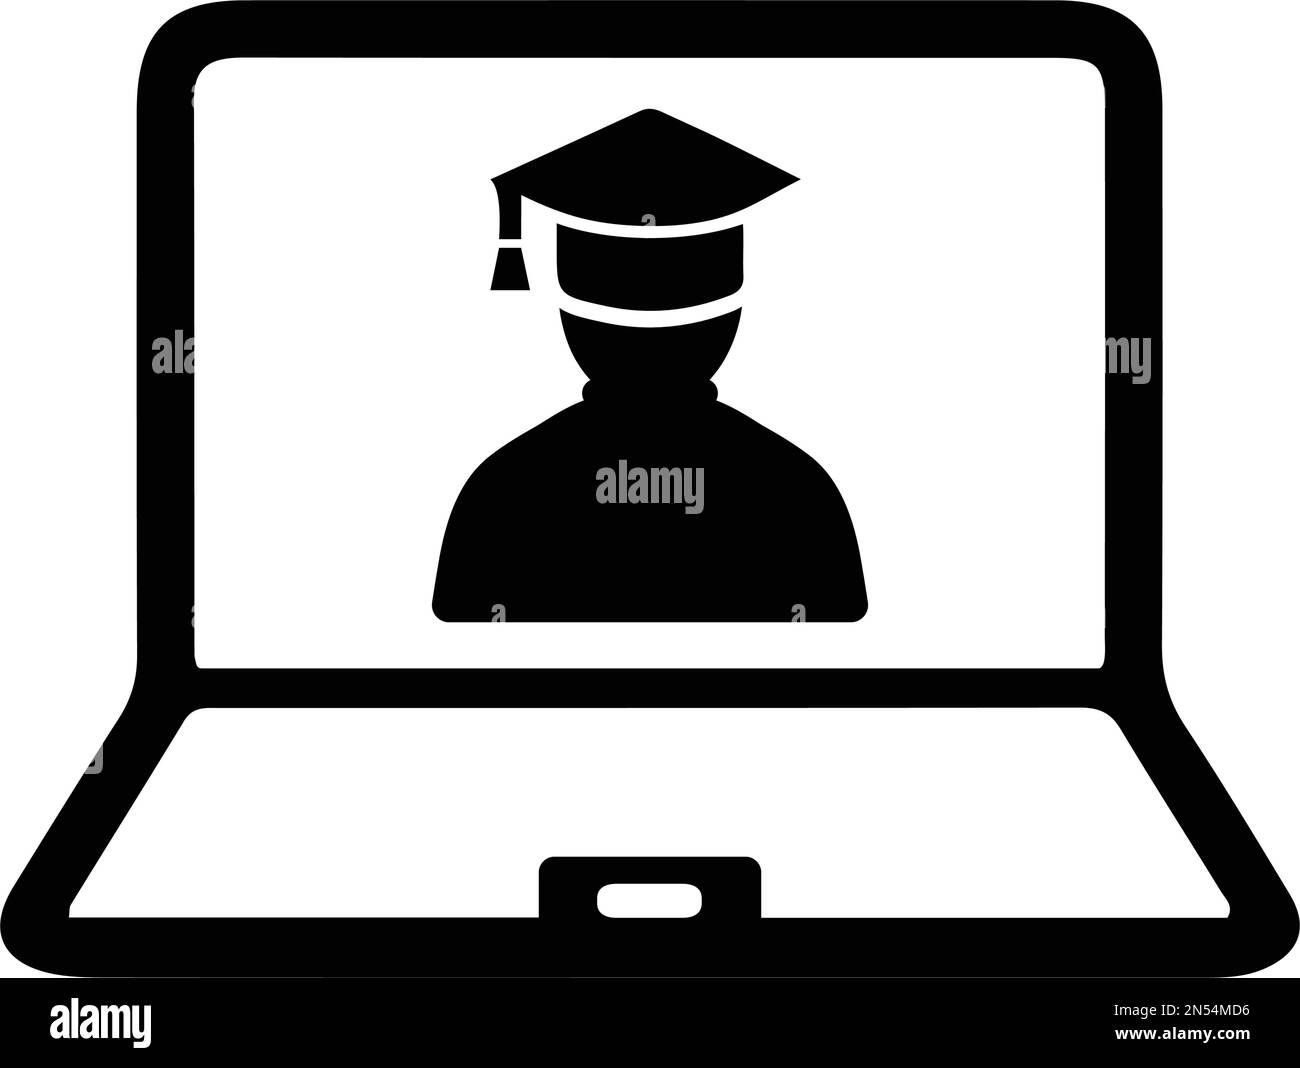 Education, graduation, elearning icon is isolated on white background. Use for graphic and web design or commercial purposes. Vector EPS file. Stock Vector